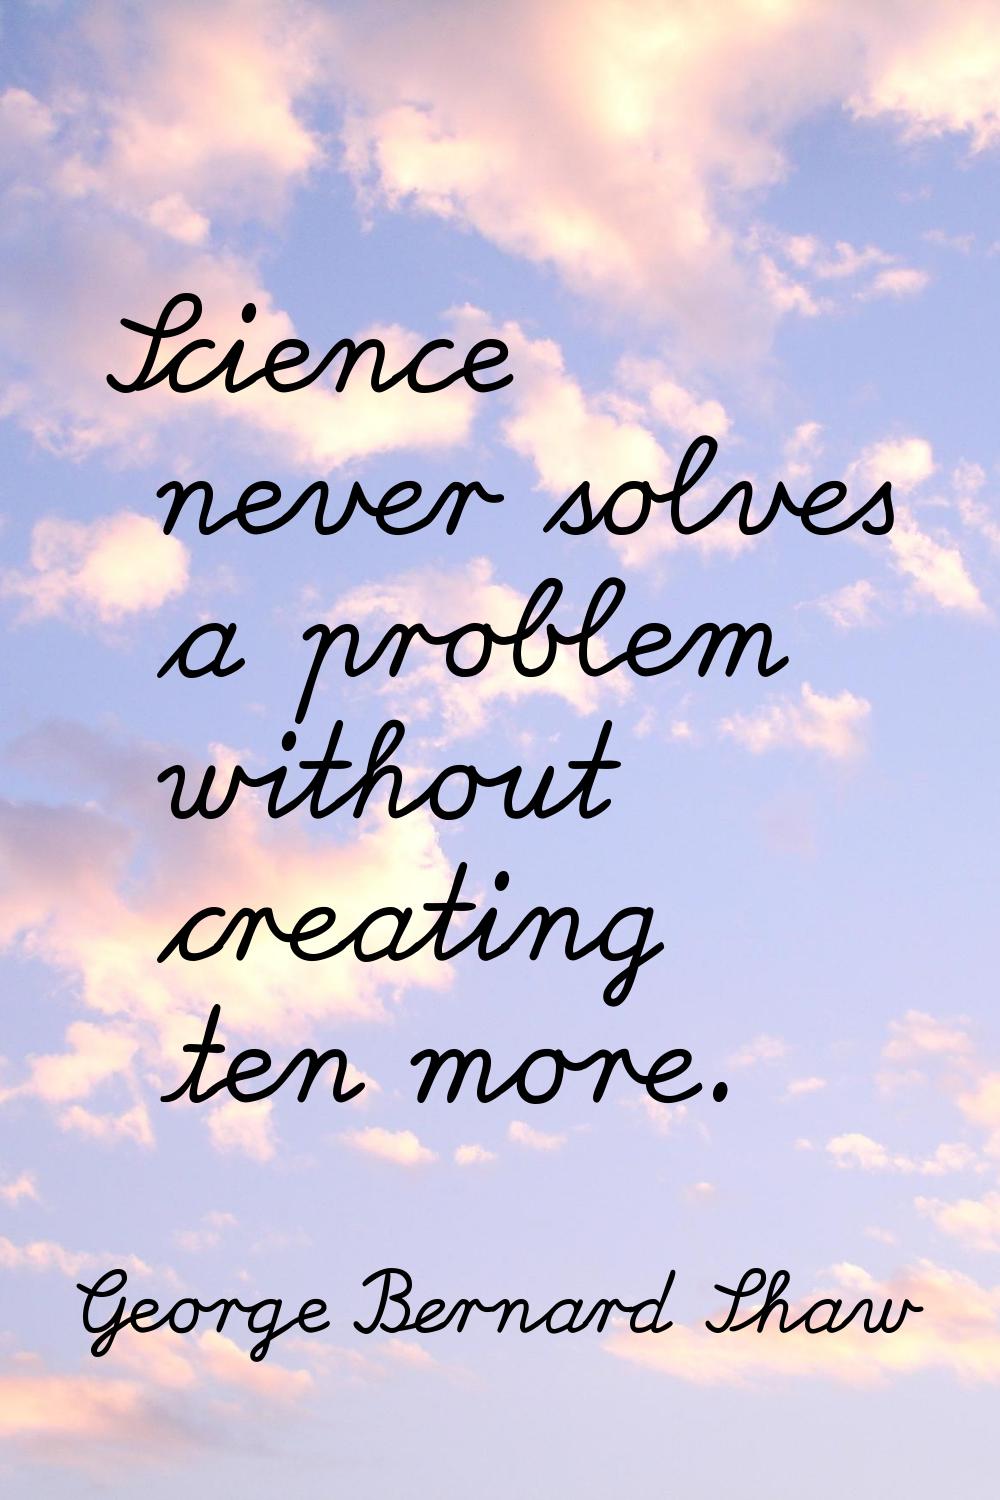 Science never solves a problem without creating ten more.